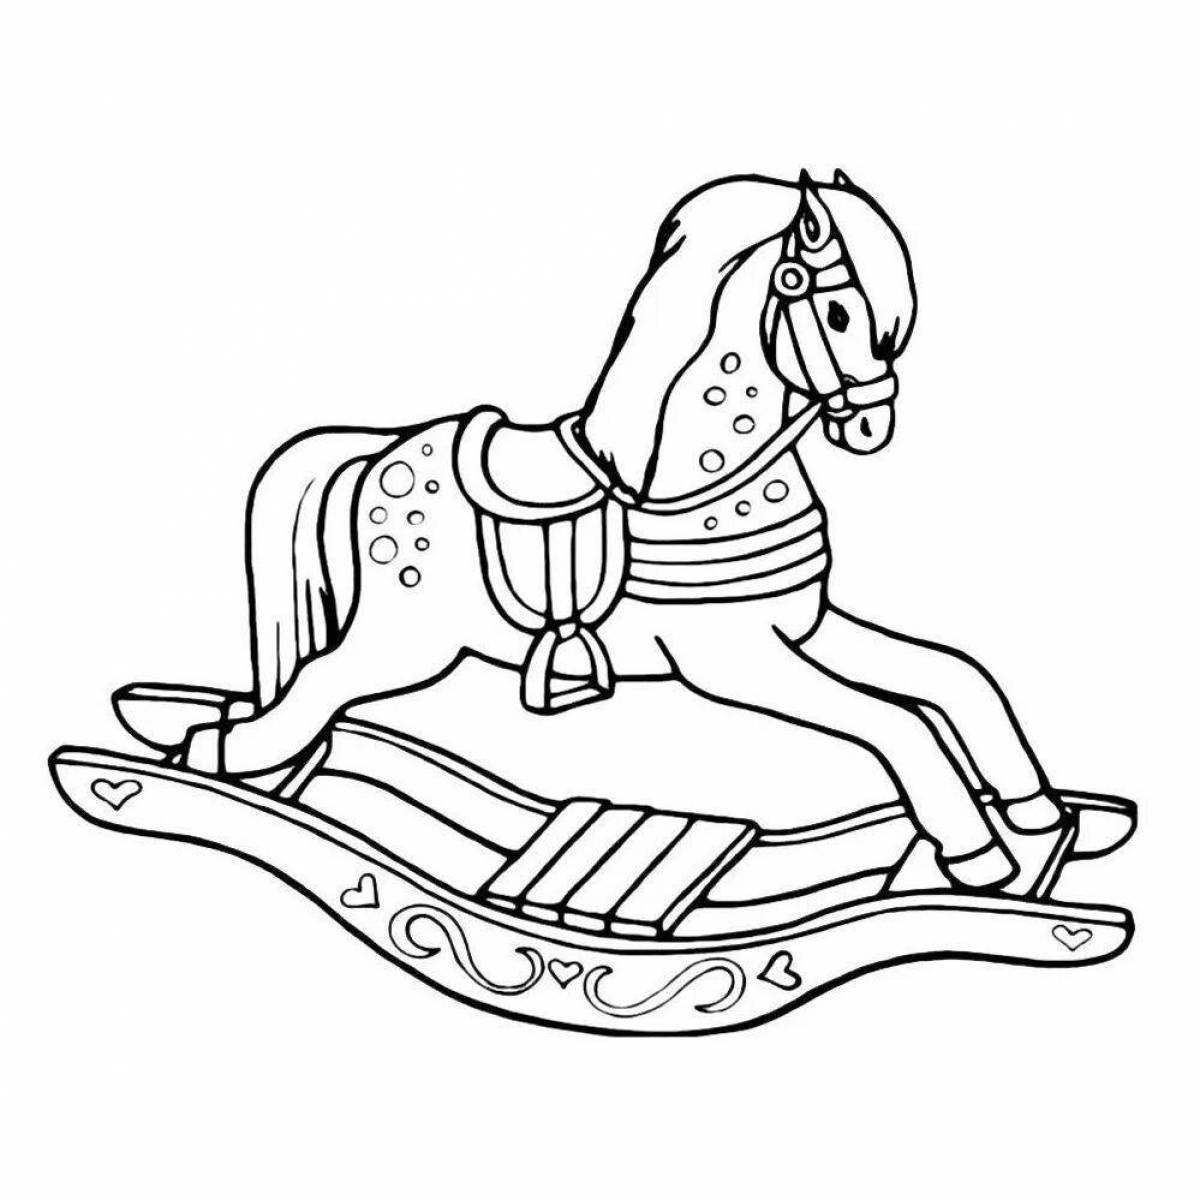 Live rocking horse coloring book